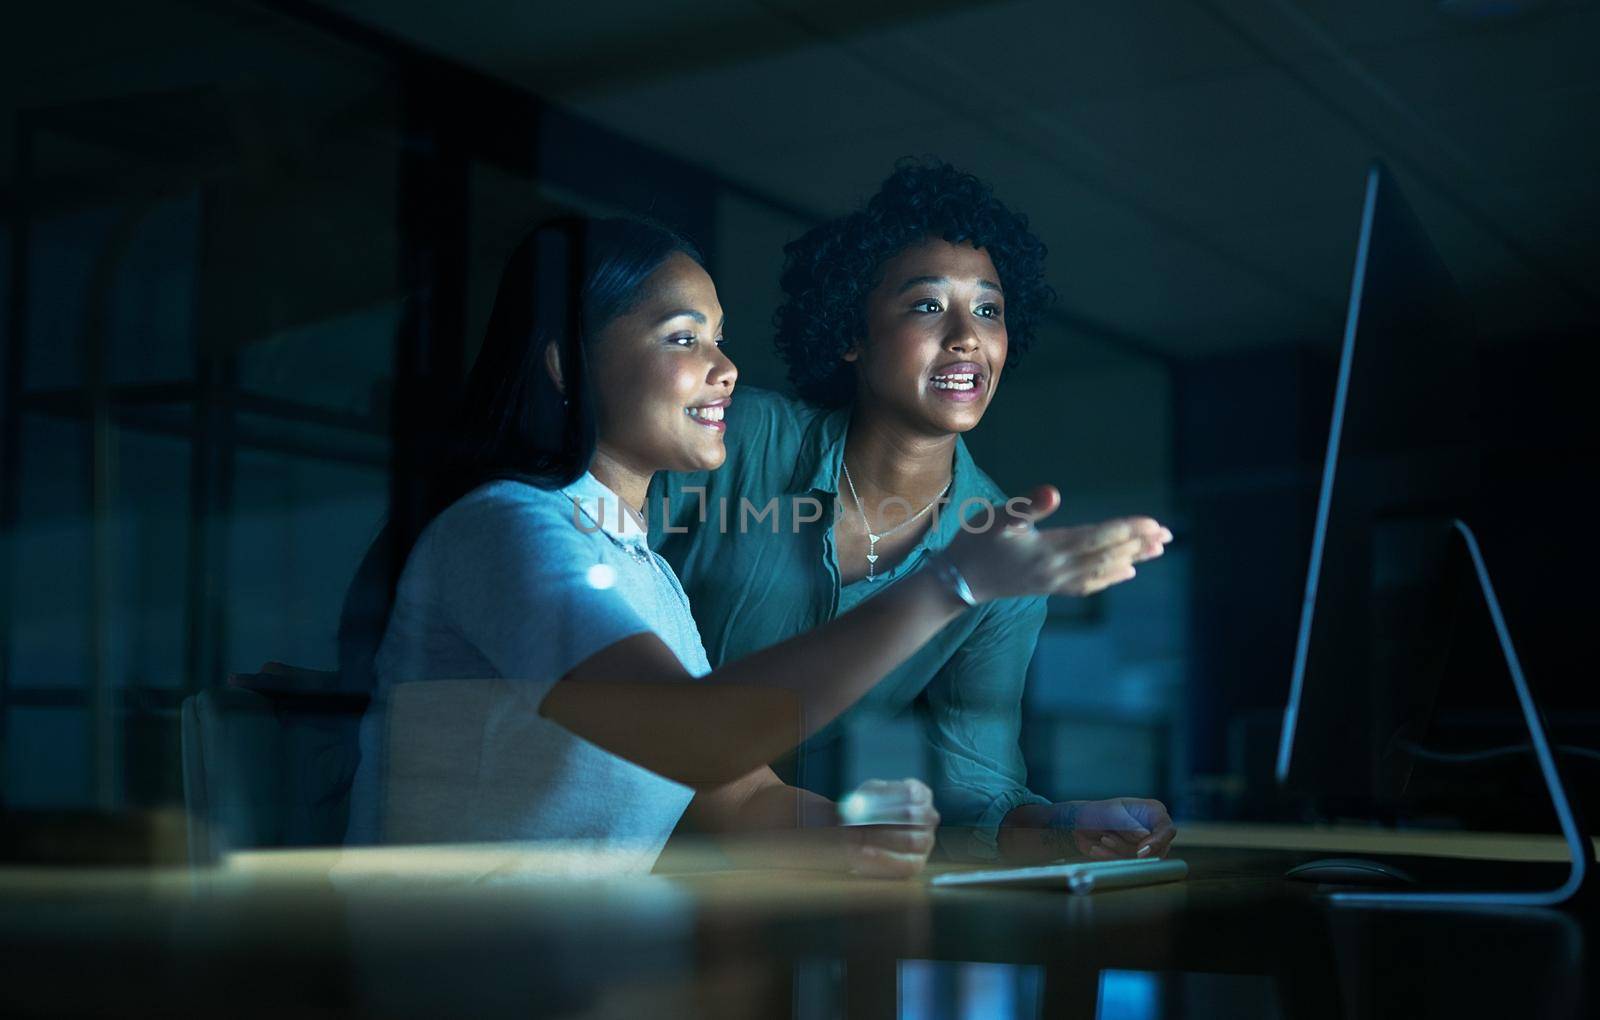 Good communication gets good results. two young businesswomen using a computer together during a late night at work. by YuriArcurs